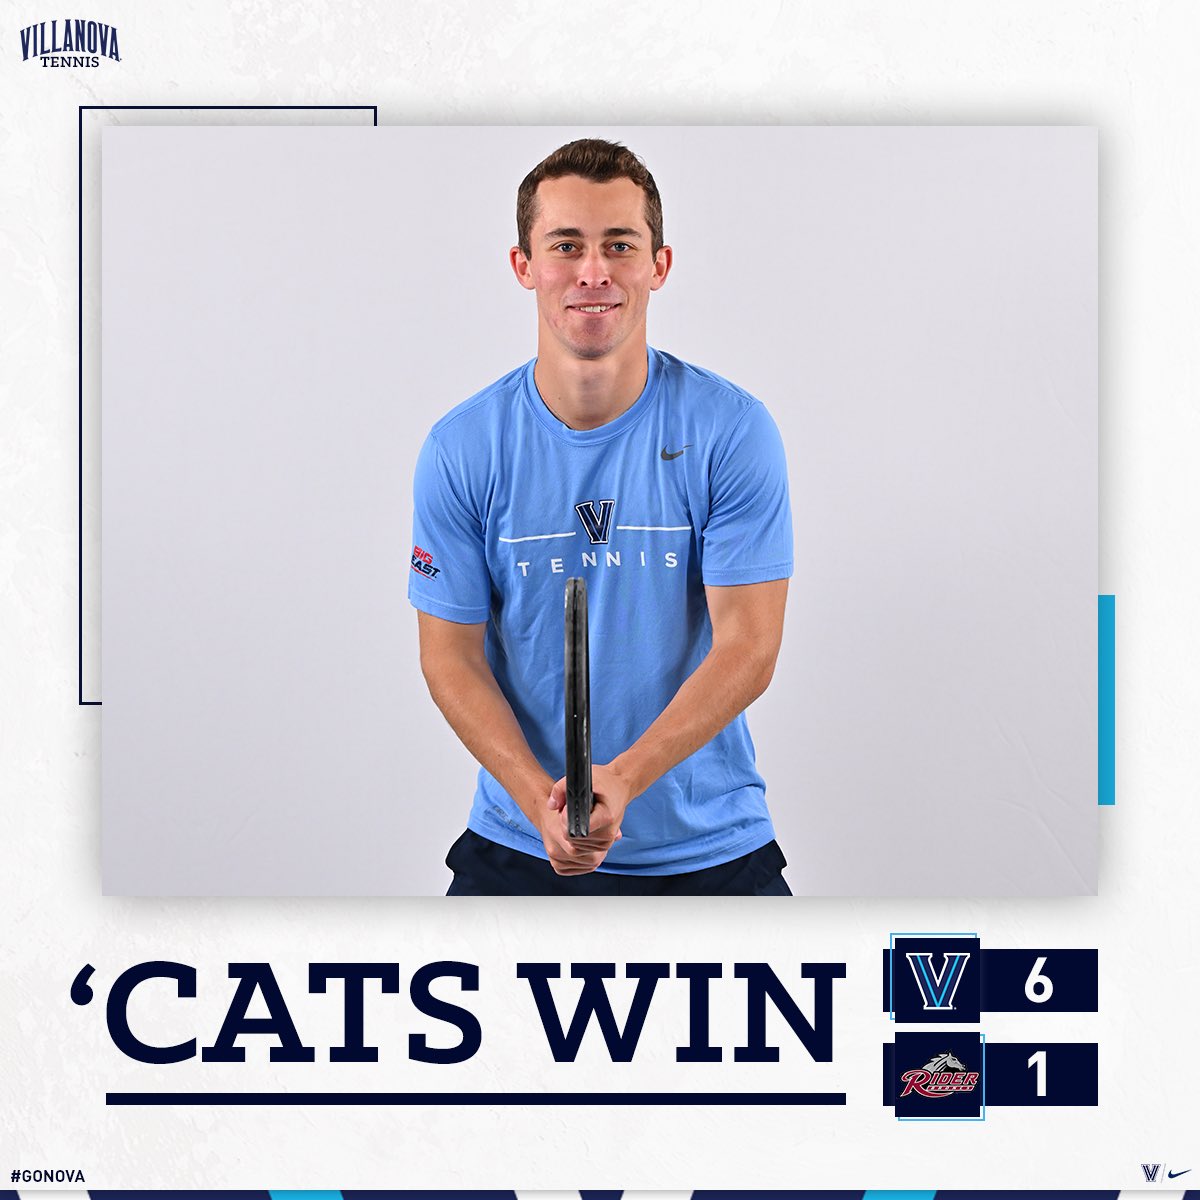 ⚠️‘𝘊𝘢𝘵𝘴 𝘞𝘪𝘯‼️
🎾Wildcats take down Rider in a 6-1 victory!!! Shoutout to Trey Fourticq for clinching the victory and to Eitan Khromchenko for his first victory of the year after returning from an injury!
#GoCats #VUMTEN #GoNova #CatsWin